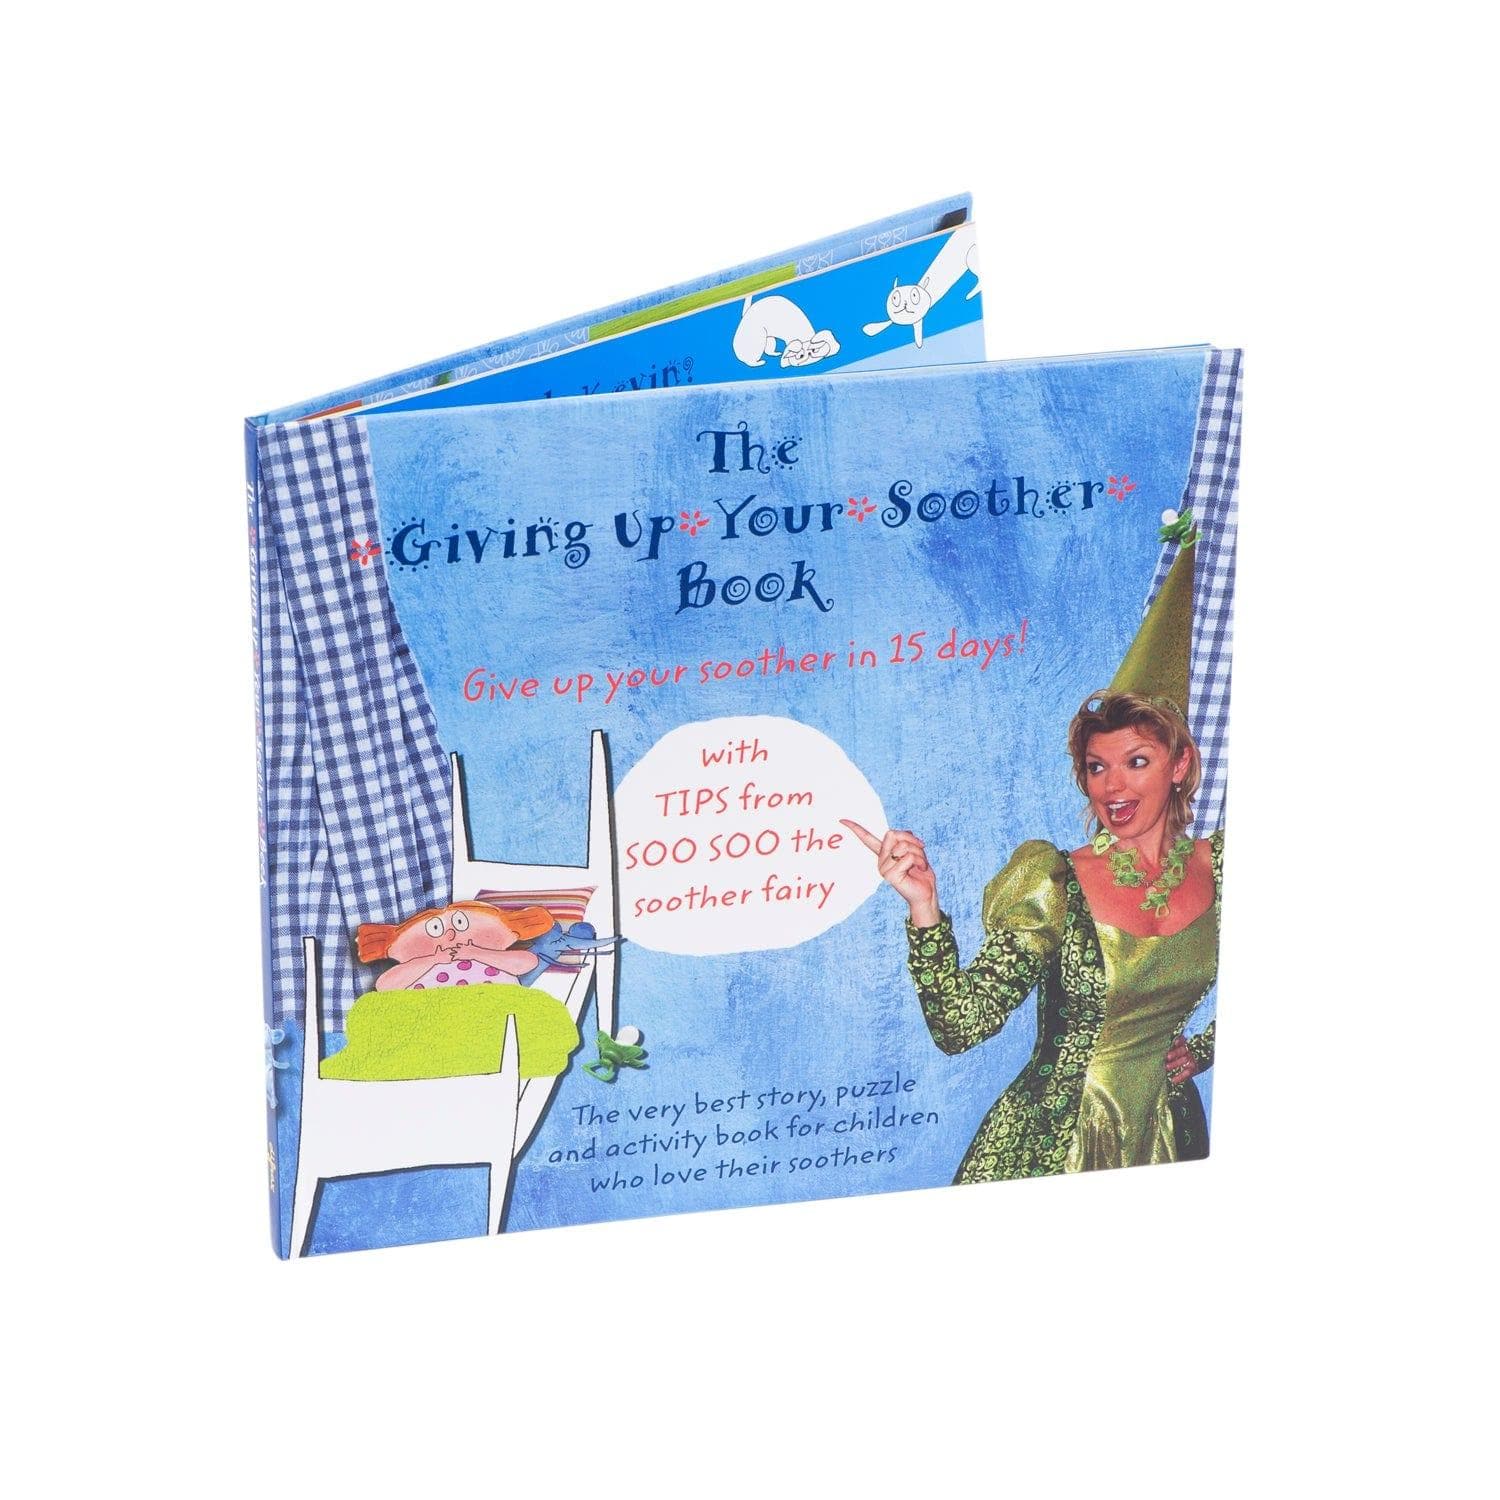 (EN) Giving up your soother book - Difrax